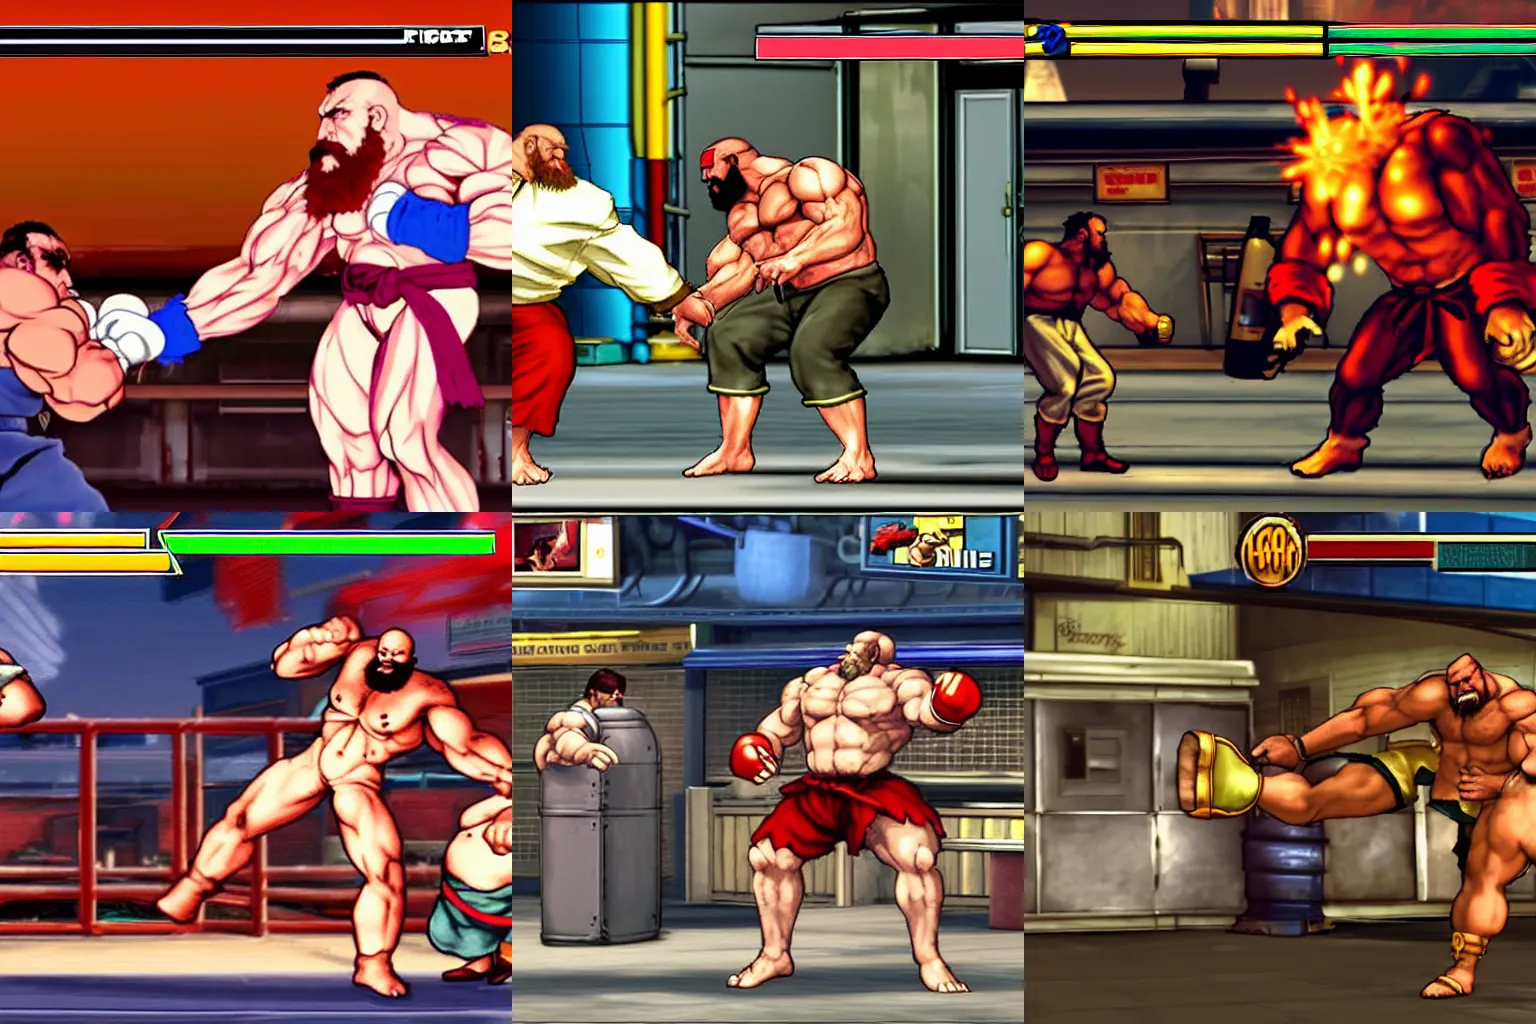 Prompt: Street Fighter IV screenshot of Zangief piledriving an elderly man during their fight in a laundromat